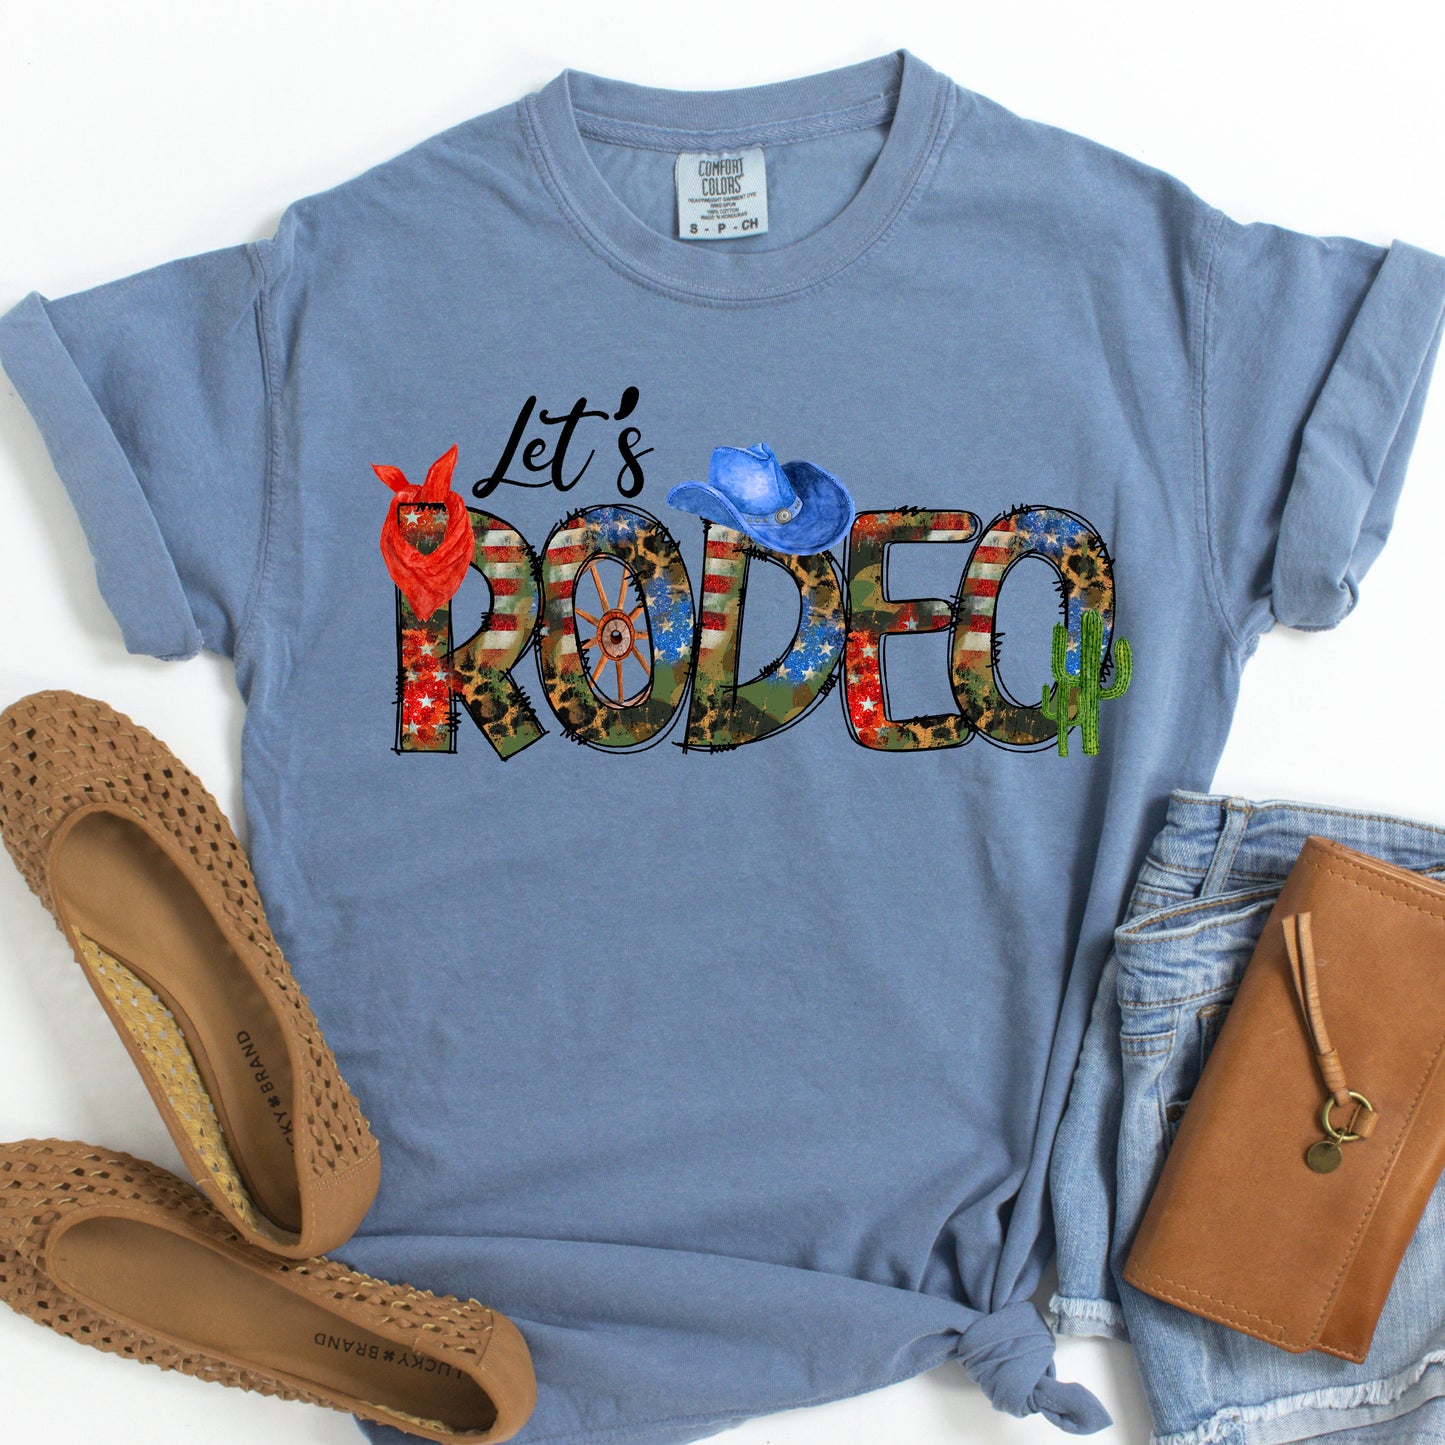 Let's Rodeo Garment-Dyed T-shirt, Rodeo Shirt, Gifts For Her, Comfy Tshirts, Western Tshirt, Western Shirt, Rodeo Tshirt, Cowgirl Shirts